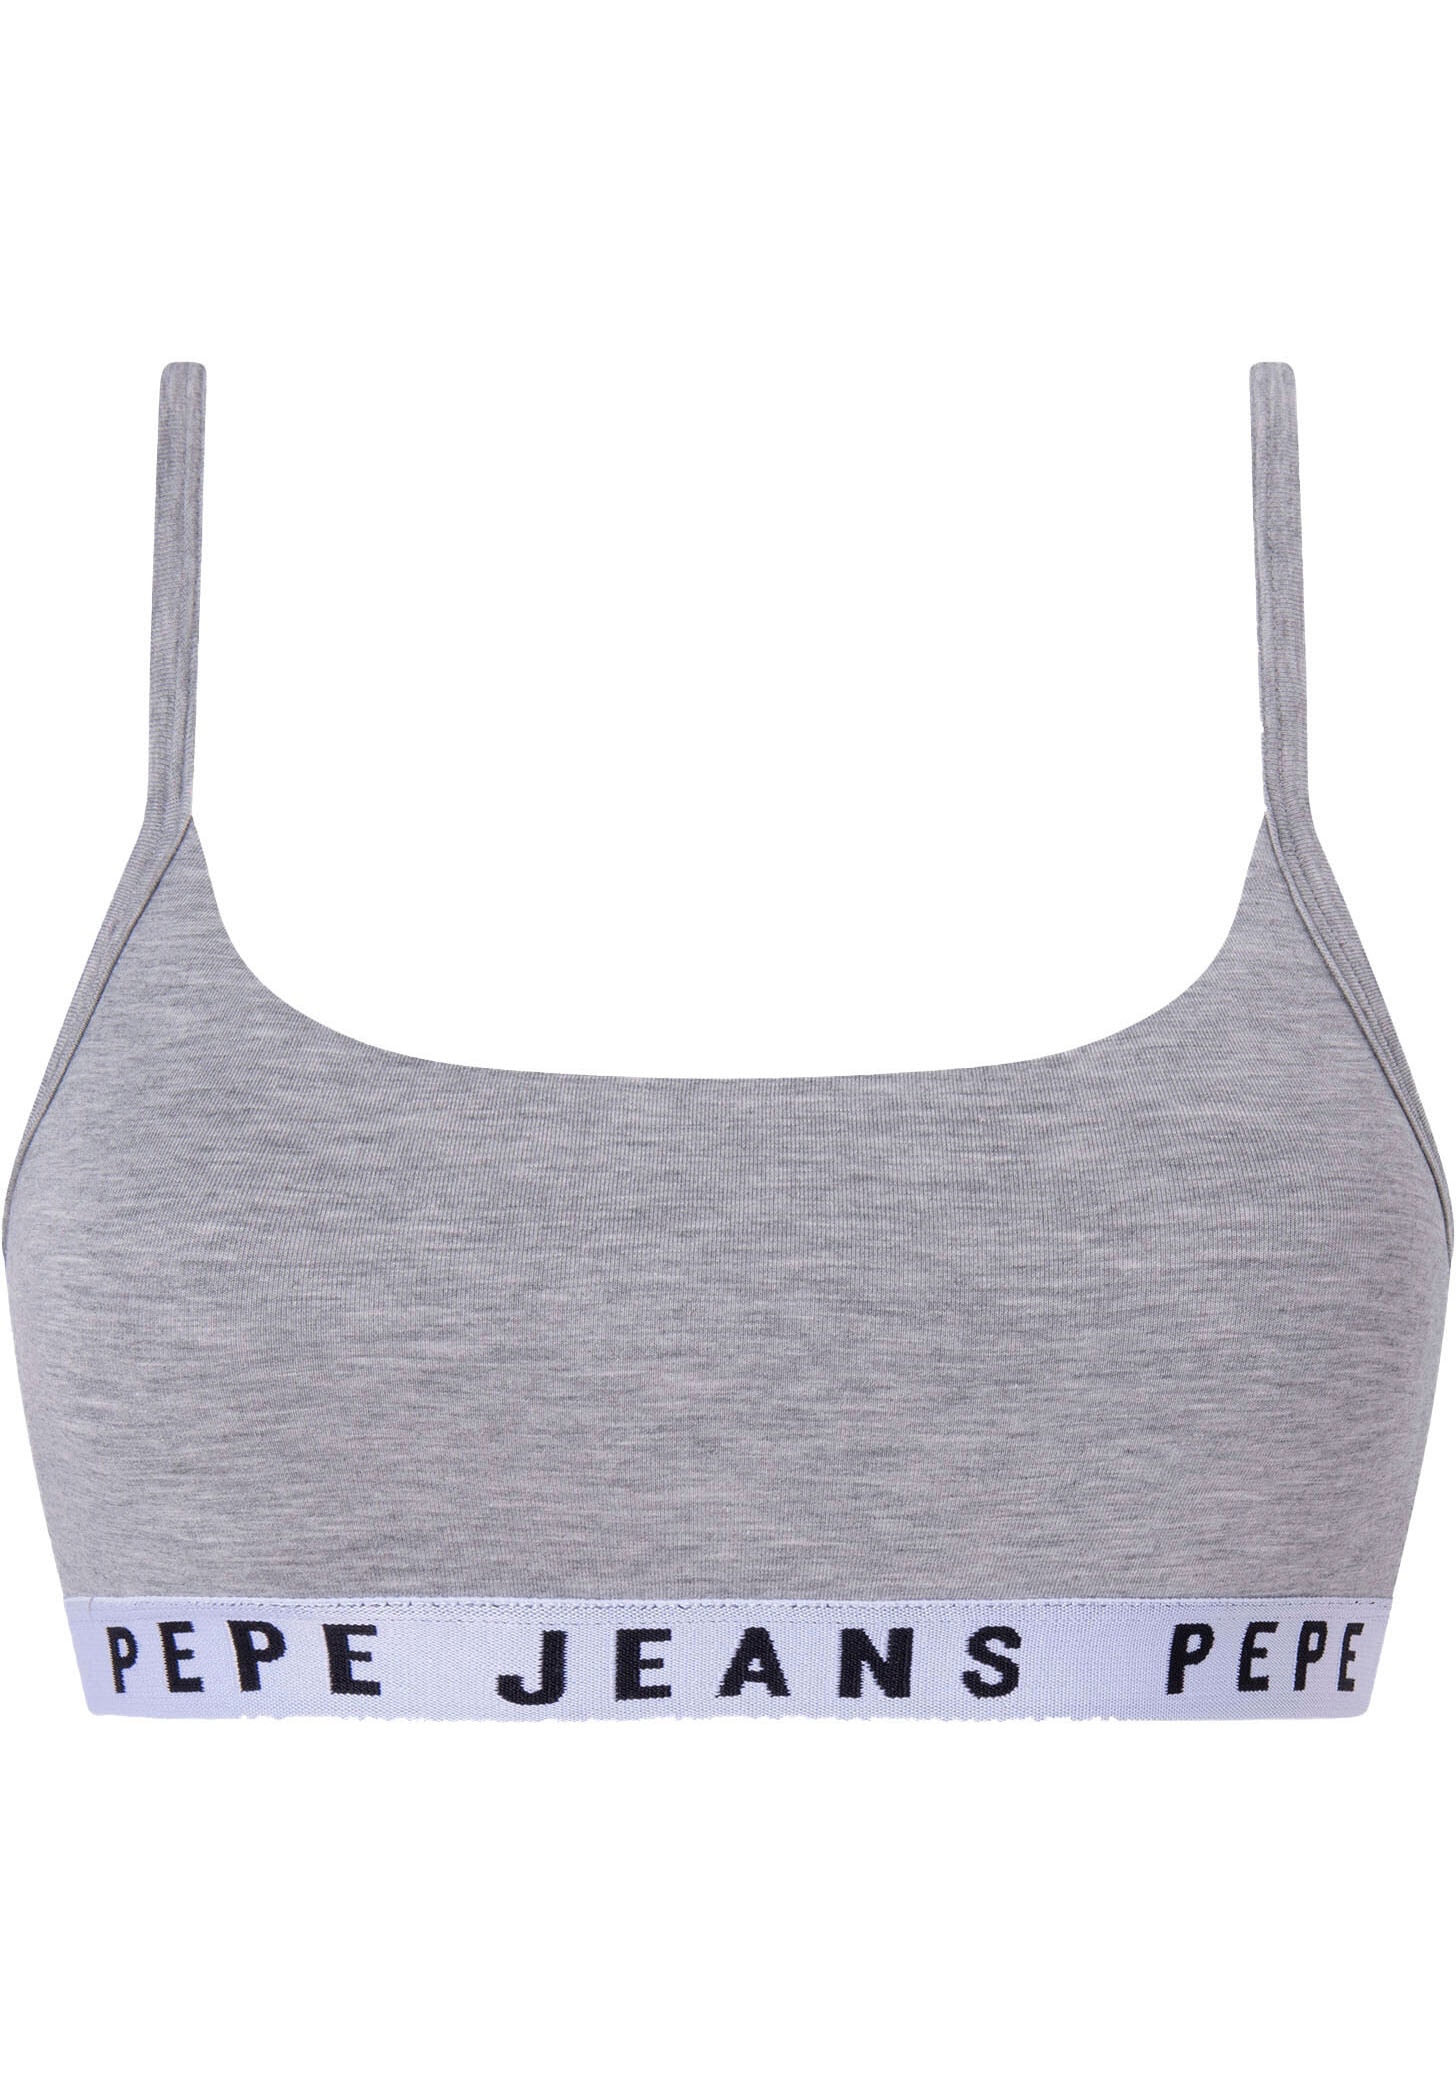 Pepe Jeans Bustier »Logo« von Pepe Jeans